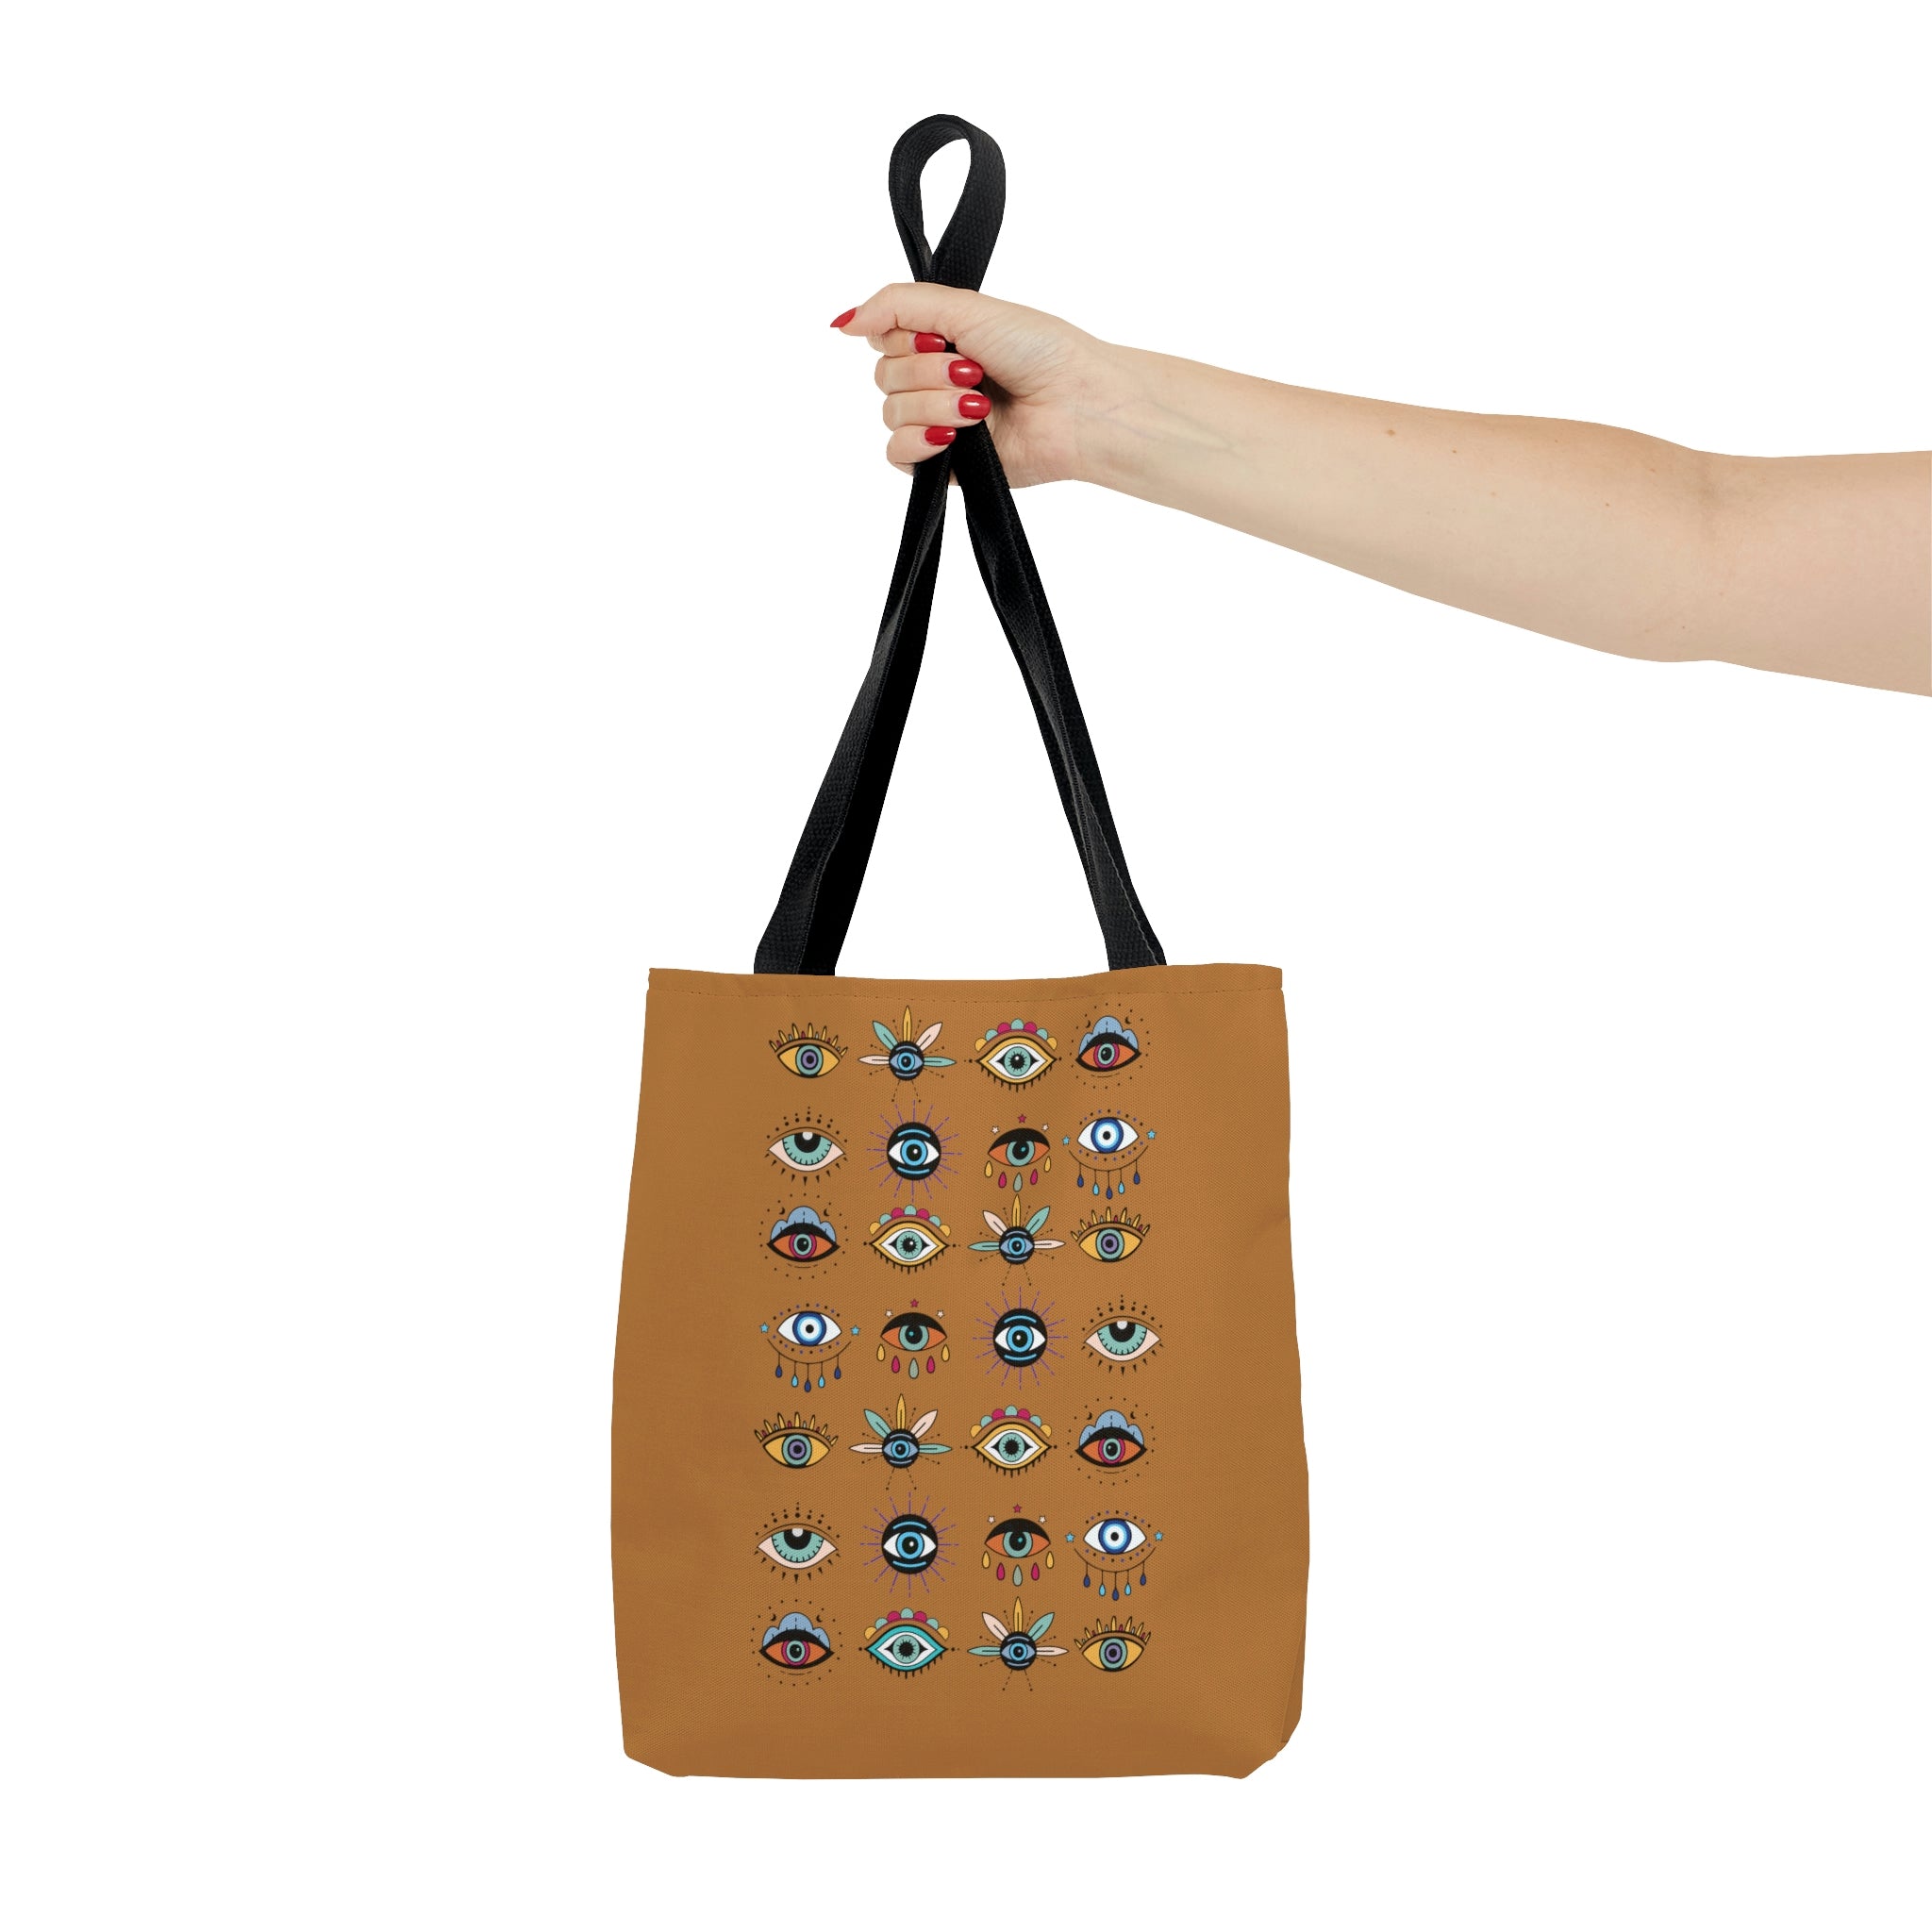 Unleash Your Inner Mystique with our Evil Eye Tote Bag